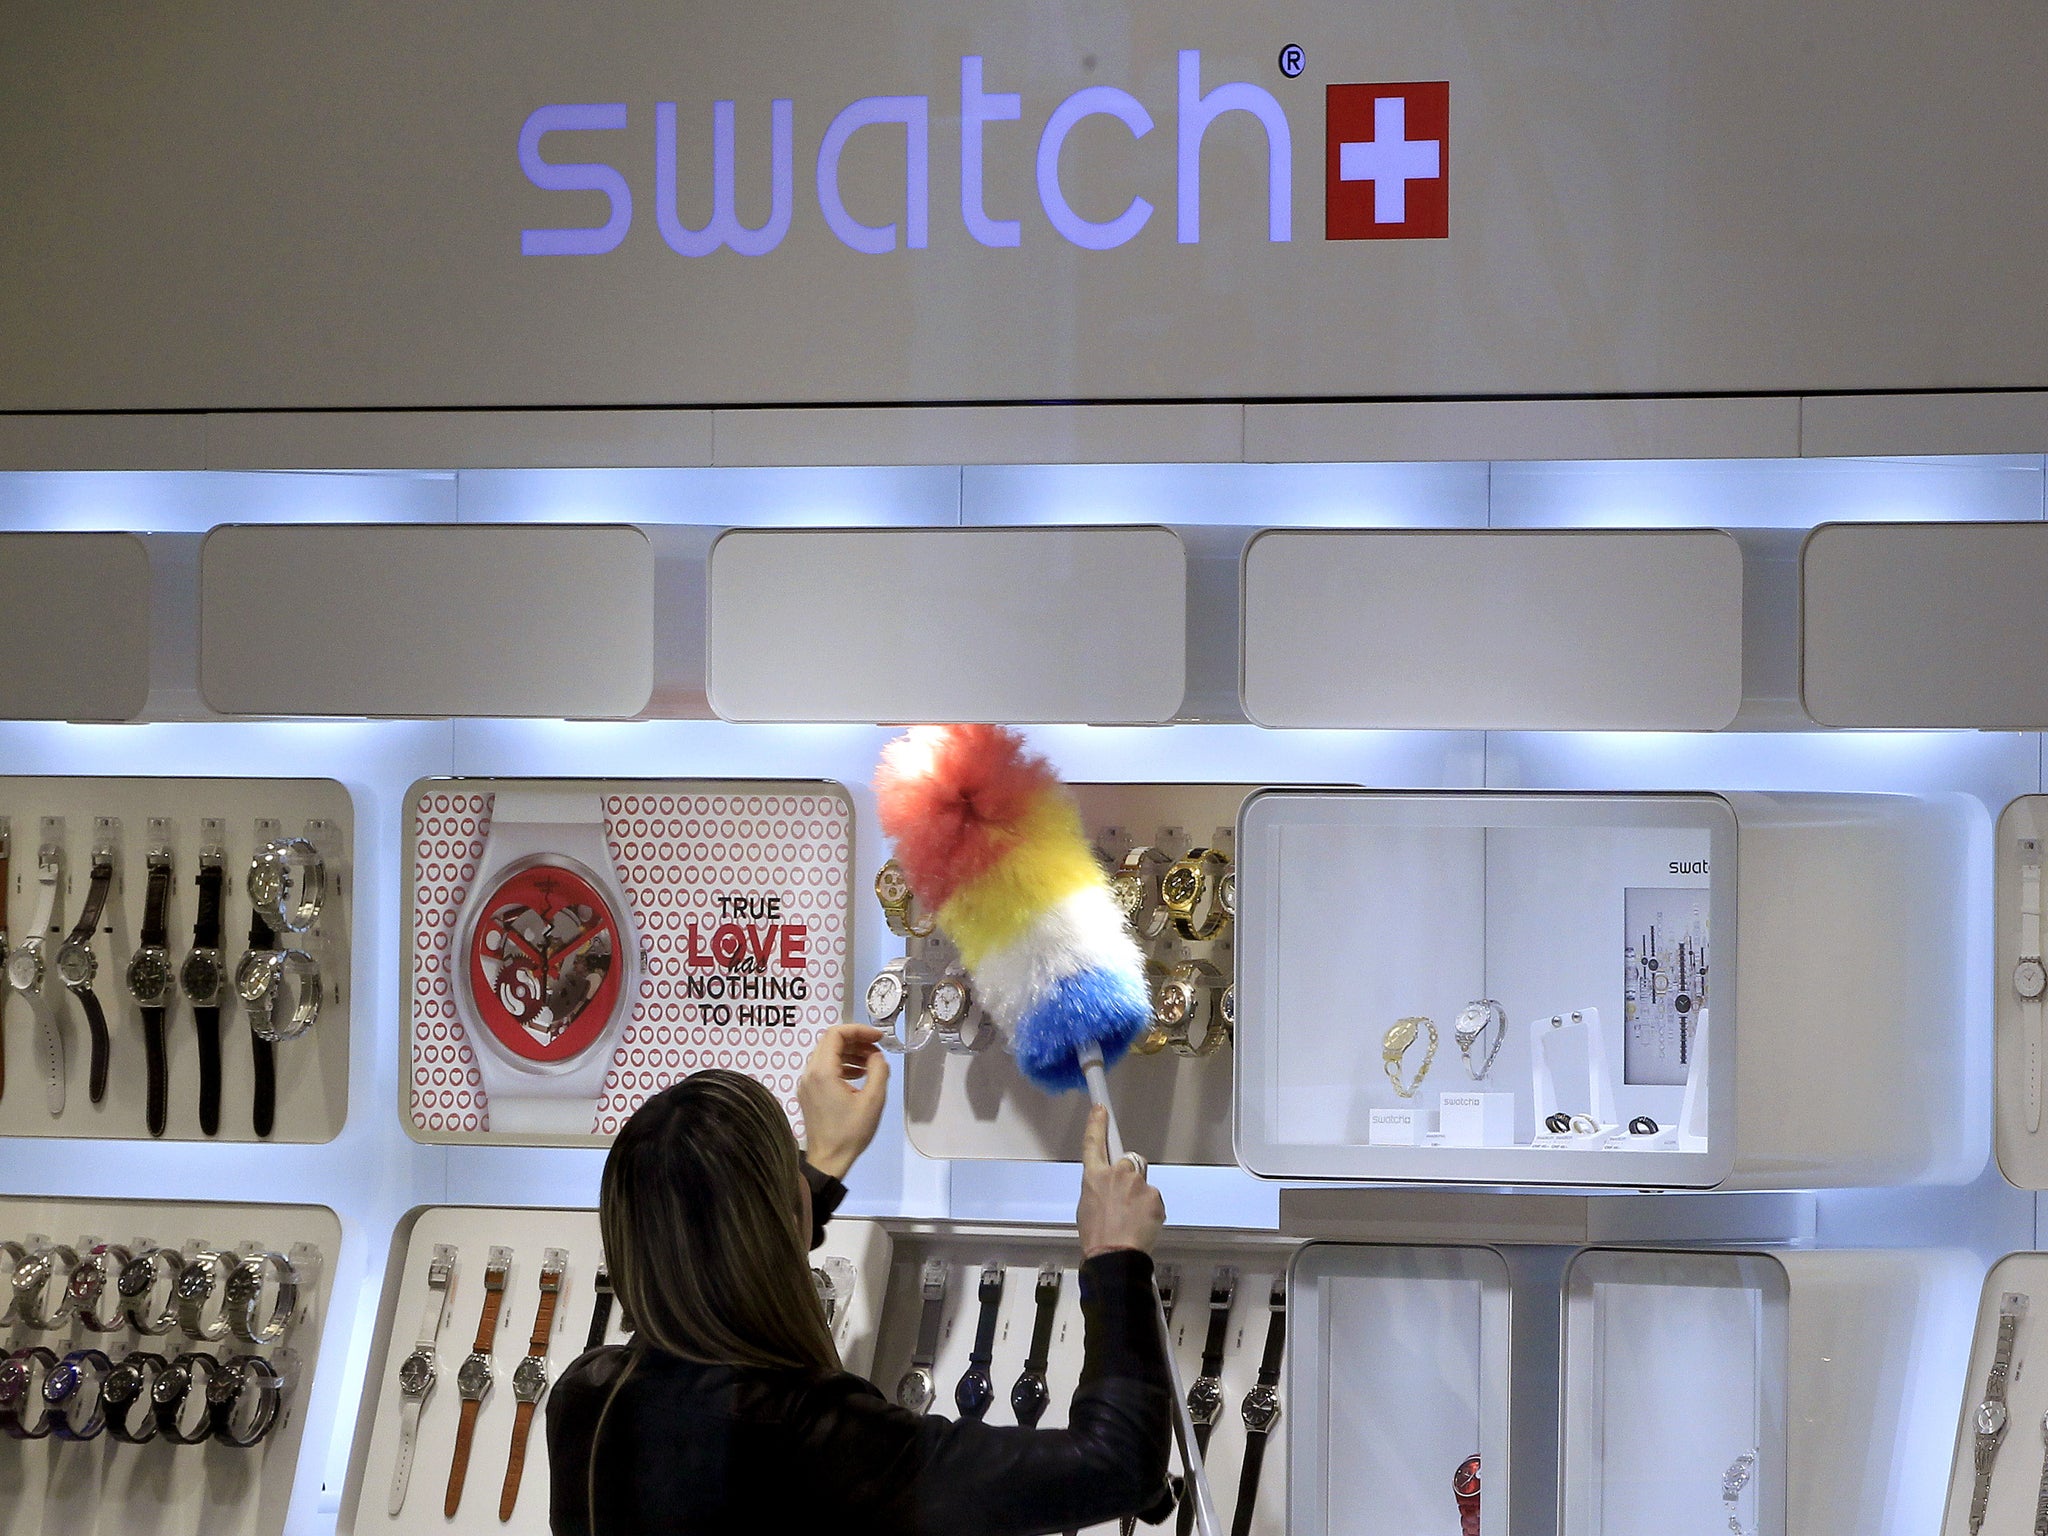 Swatch dusting off its smart watches: a woman cleans a display of watches at a Swatch store